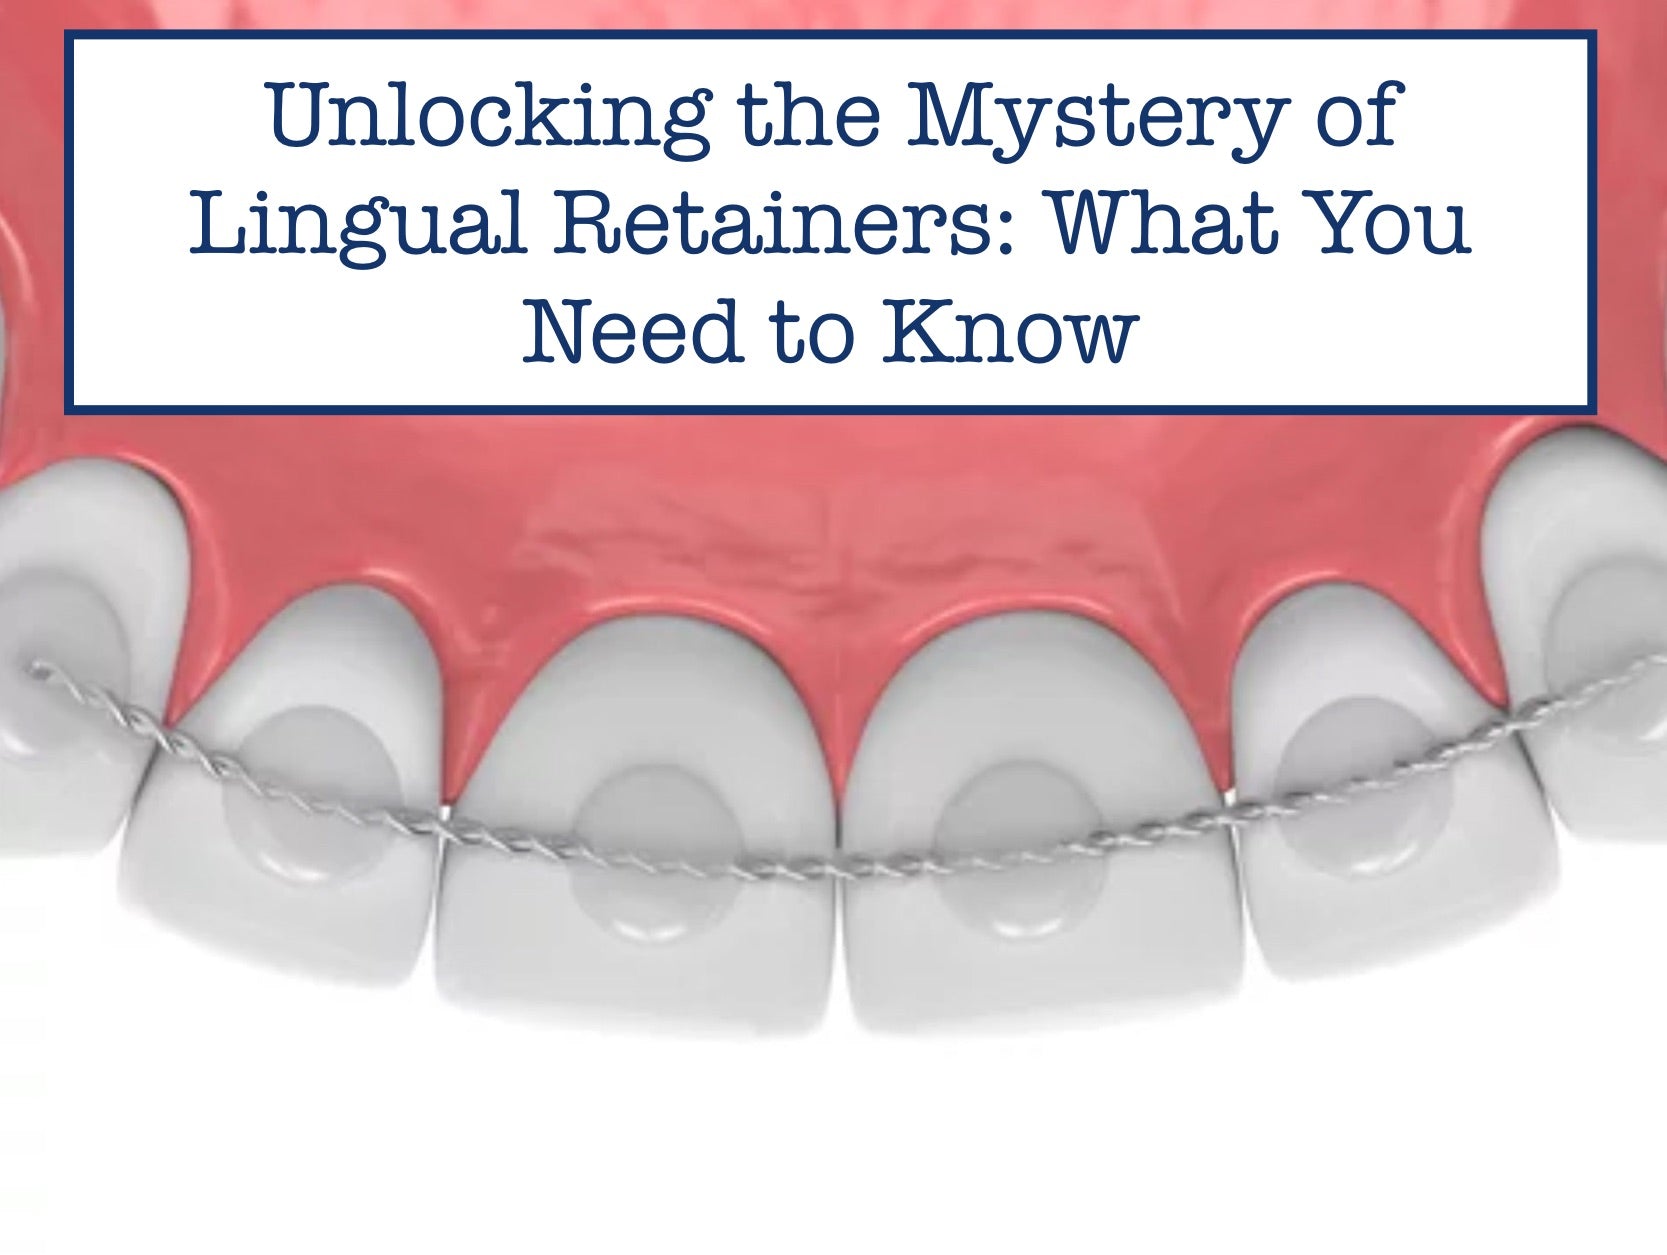 Unlocking the Mystery of Lingual Retainers: What You Need to Know